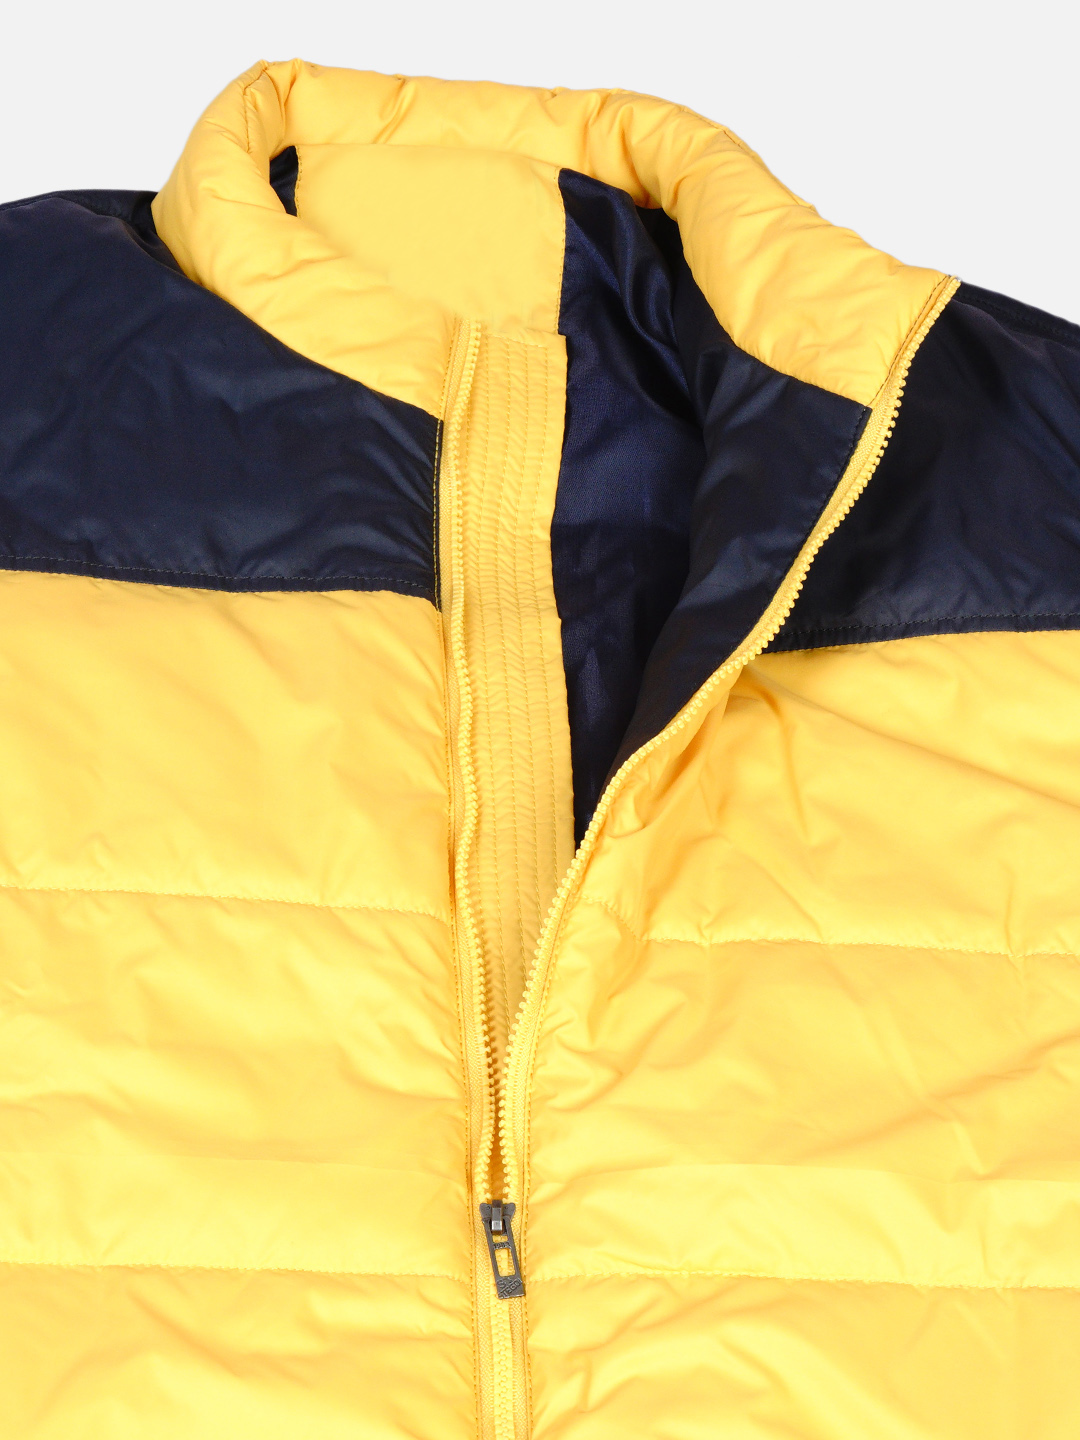 Colorblocked Puffer Jacket